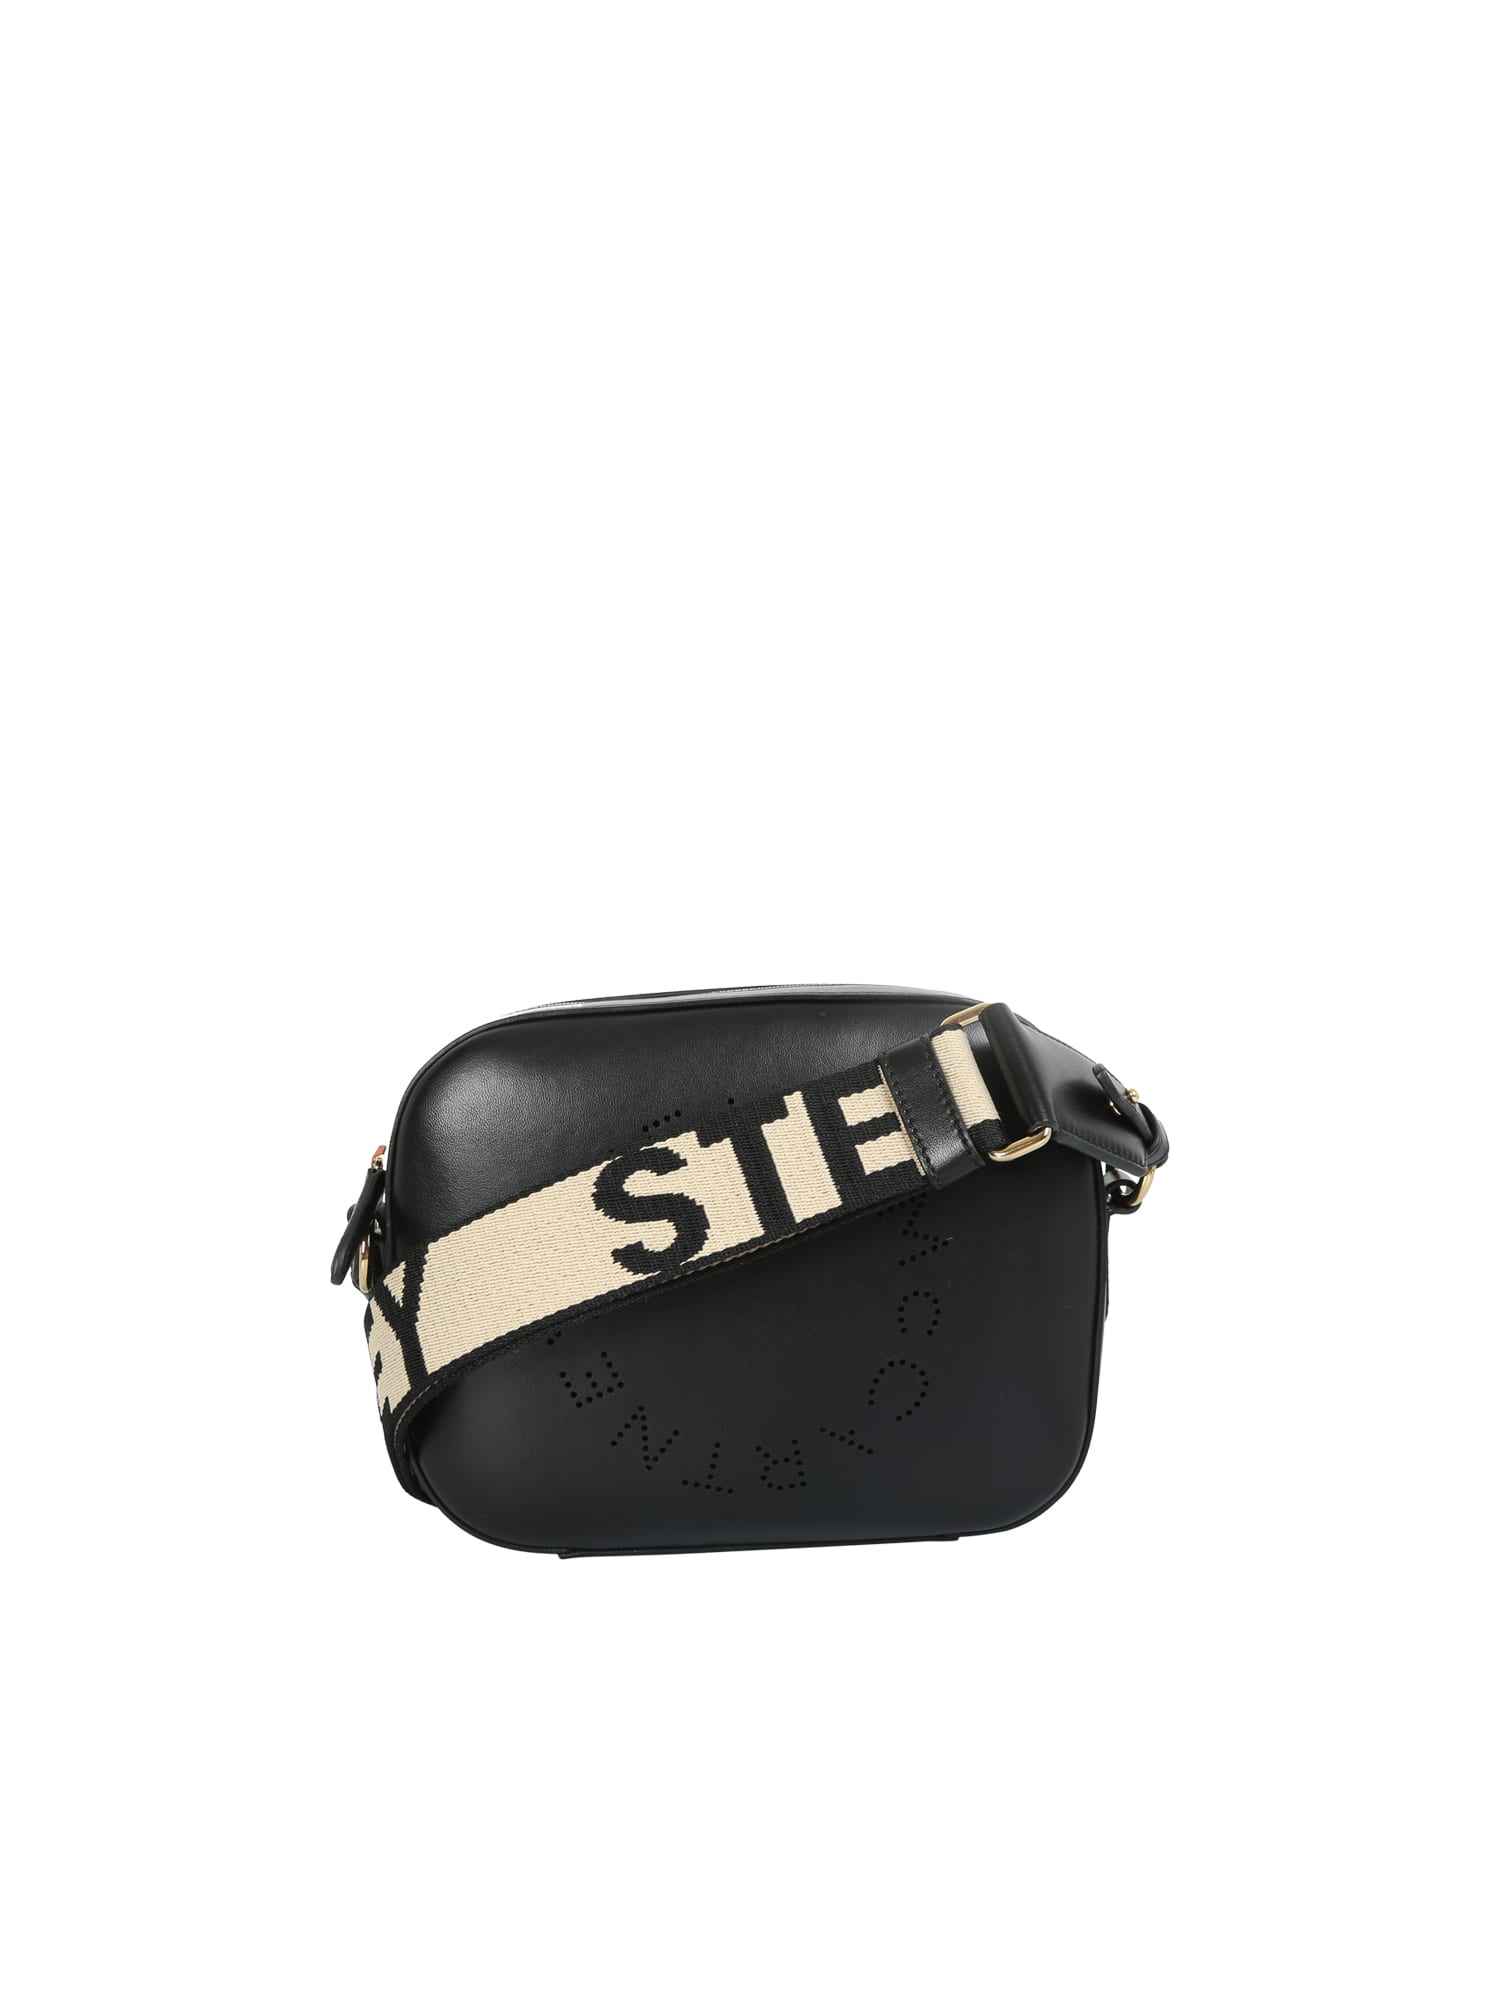 For An Everyday Look, The Mini Versions Of The Stella Mccartney Logo Crossbody Bag Are Ideal